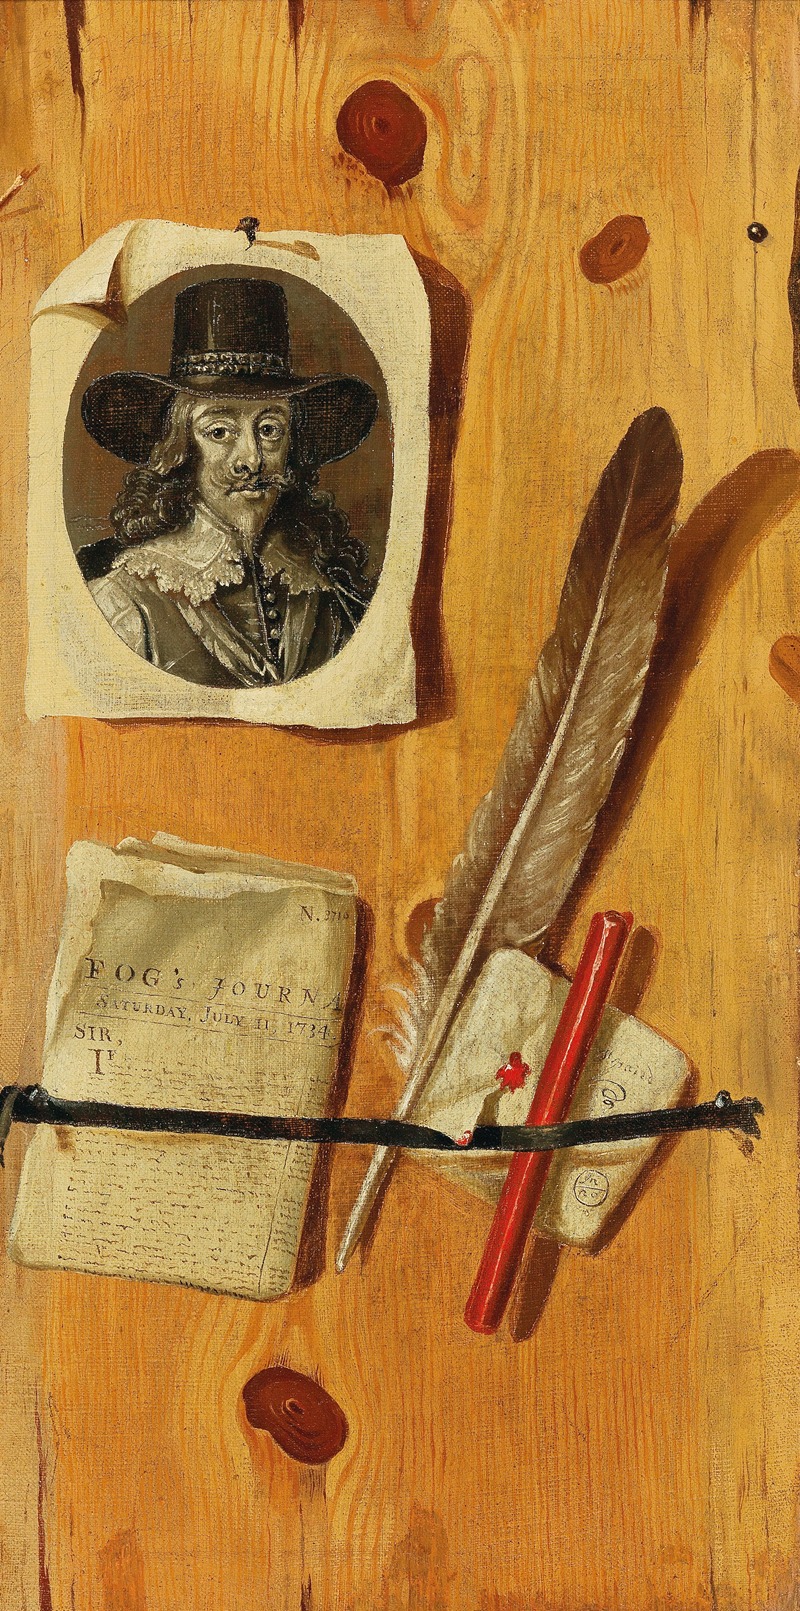 Jacobus Plasschaert - A trompe-l’oeil painting with an engraved portrait of King Charles I, an issue of Fog’s Journal, dated 1734, a quill pen and sealing wax, held against a wooden backboard